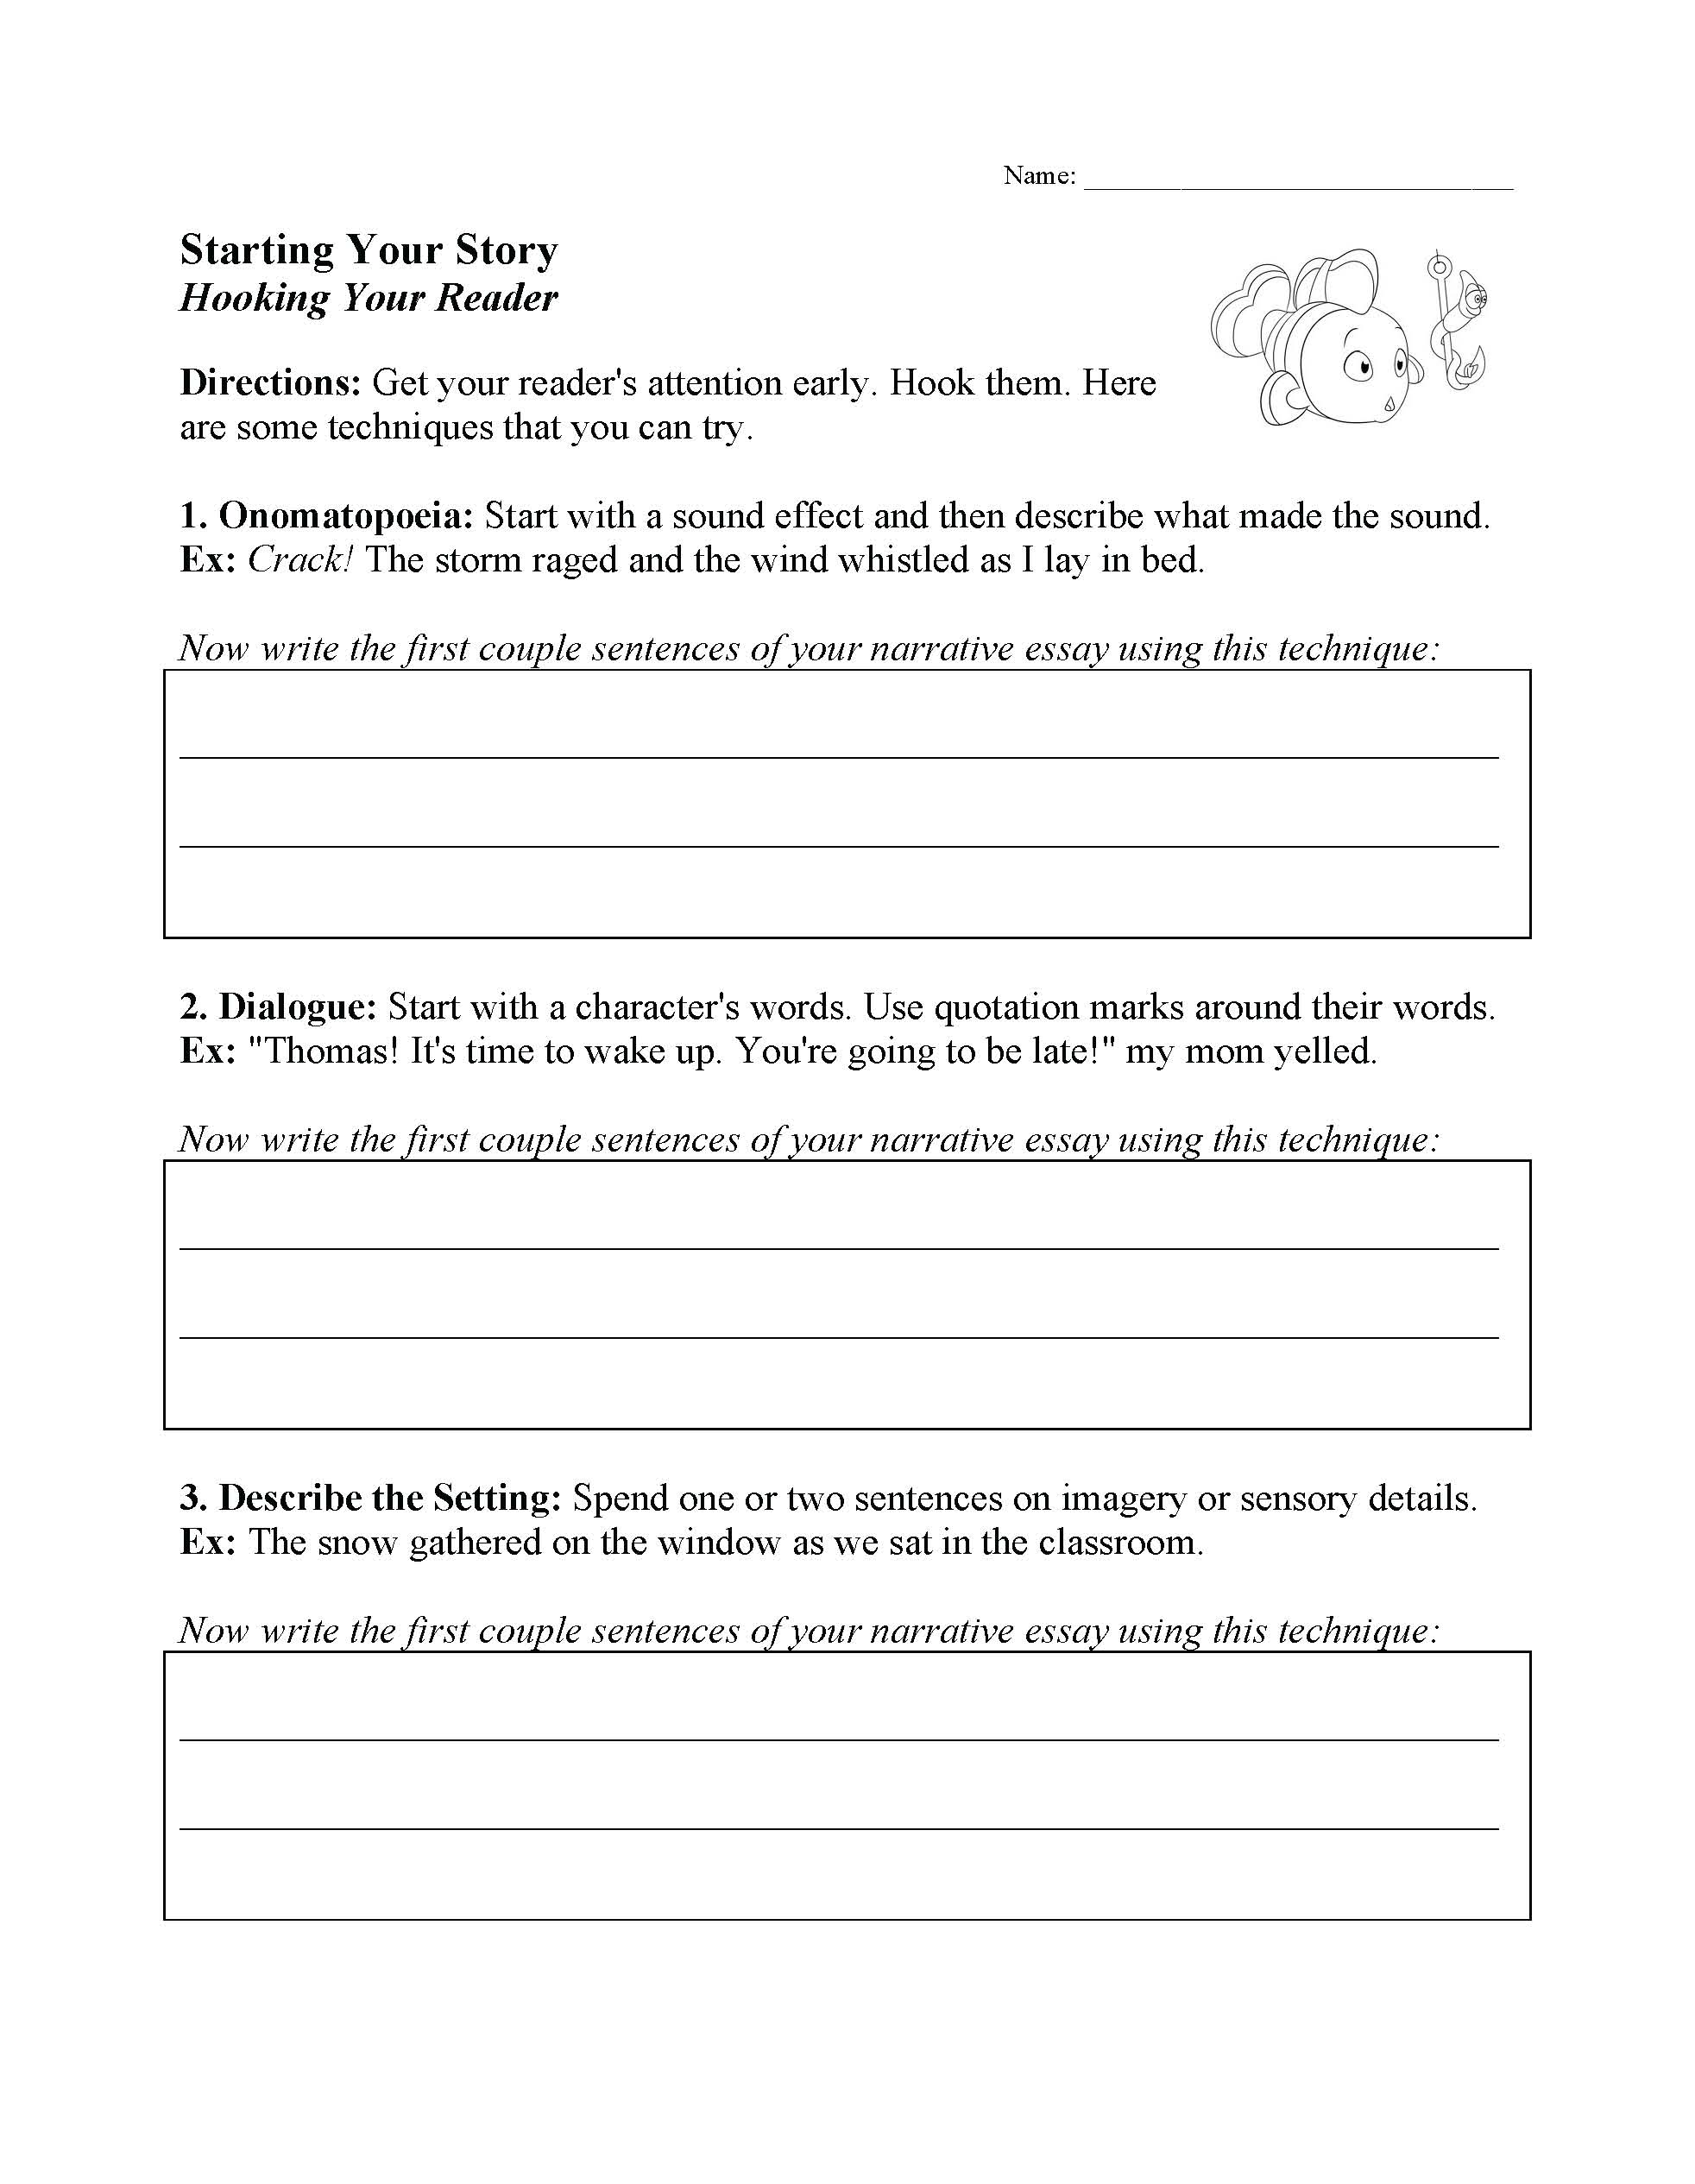 This is a preview image of our Starting Your Story Worksheet. Click on it to enlarge this image and view the source file.